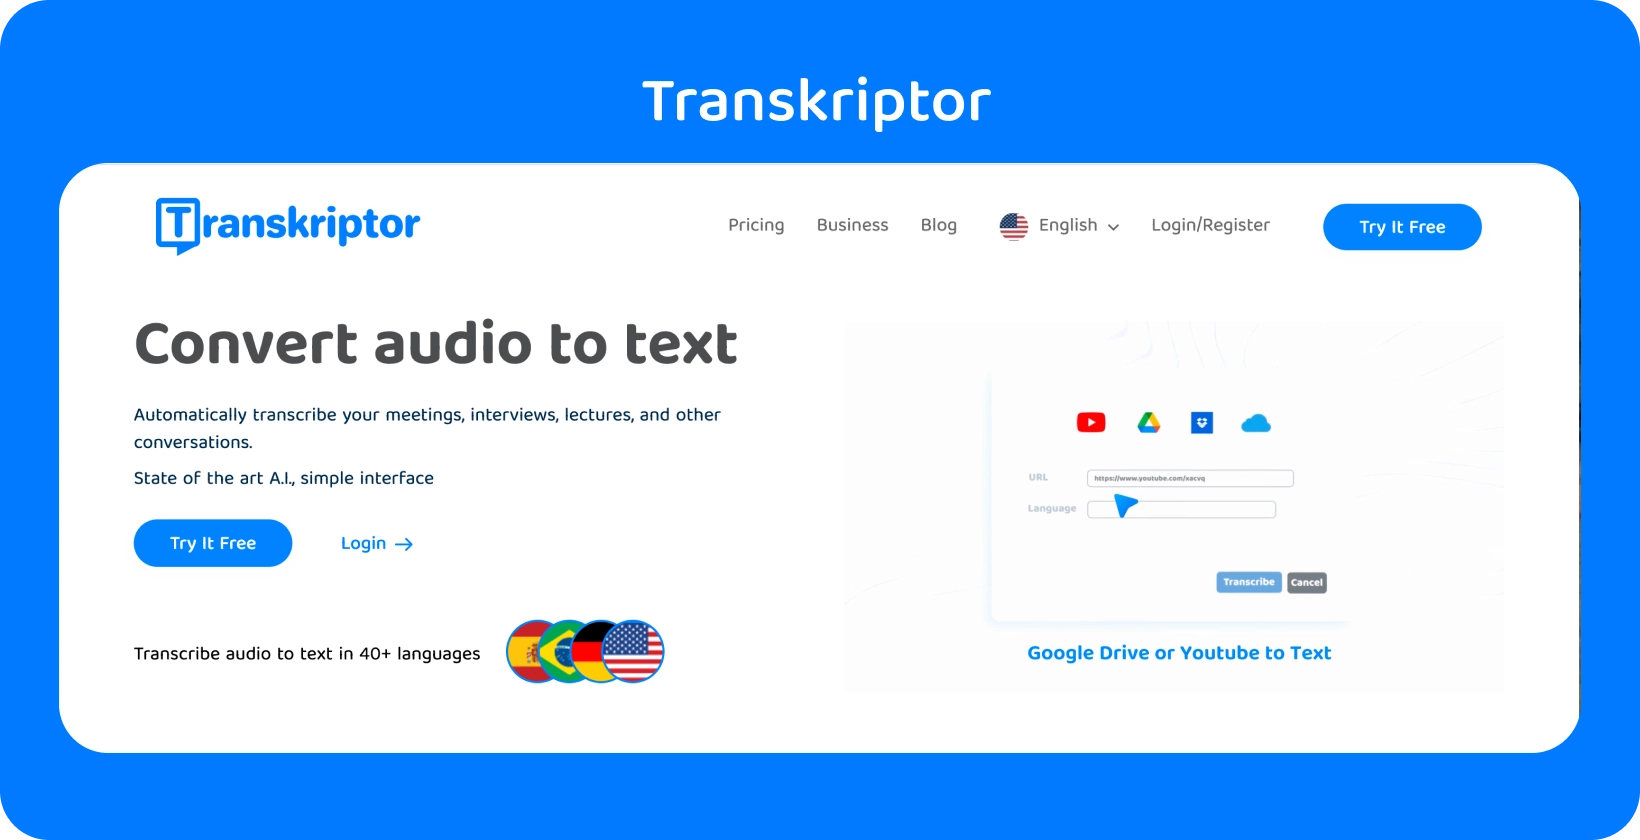 Transkriptor's webpage mentioning the 'Convert audio to text' feature, ready for easy transcription.